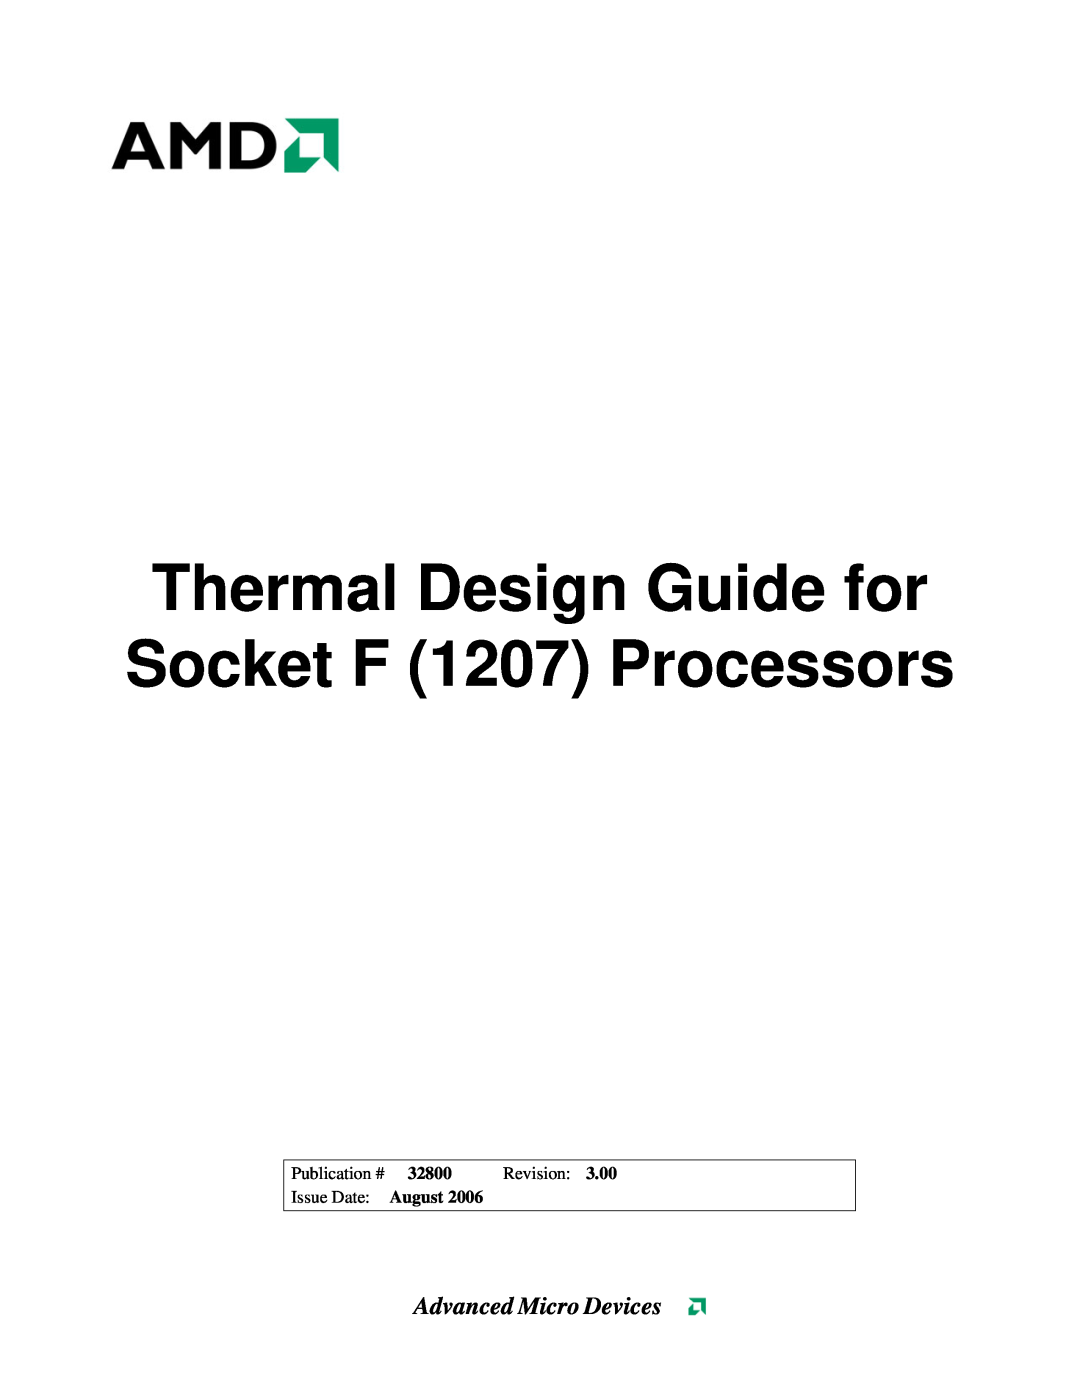 AMD manual Thermal Design Guide for Socket F 1207 Processors, Advanced Micro Devices, Publication #, 32800, Revision 